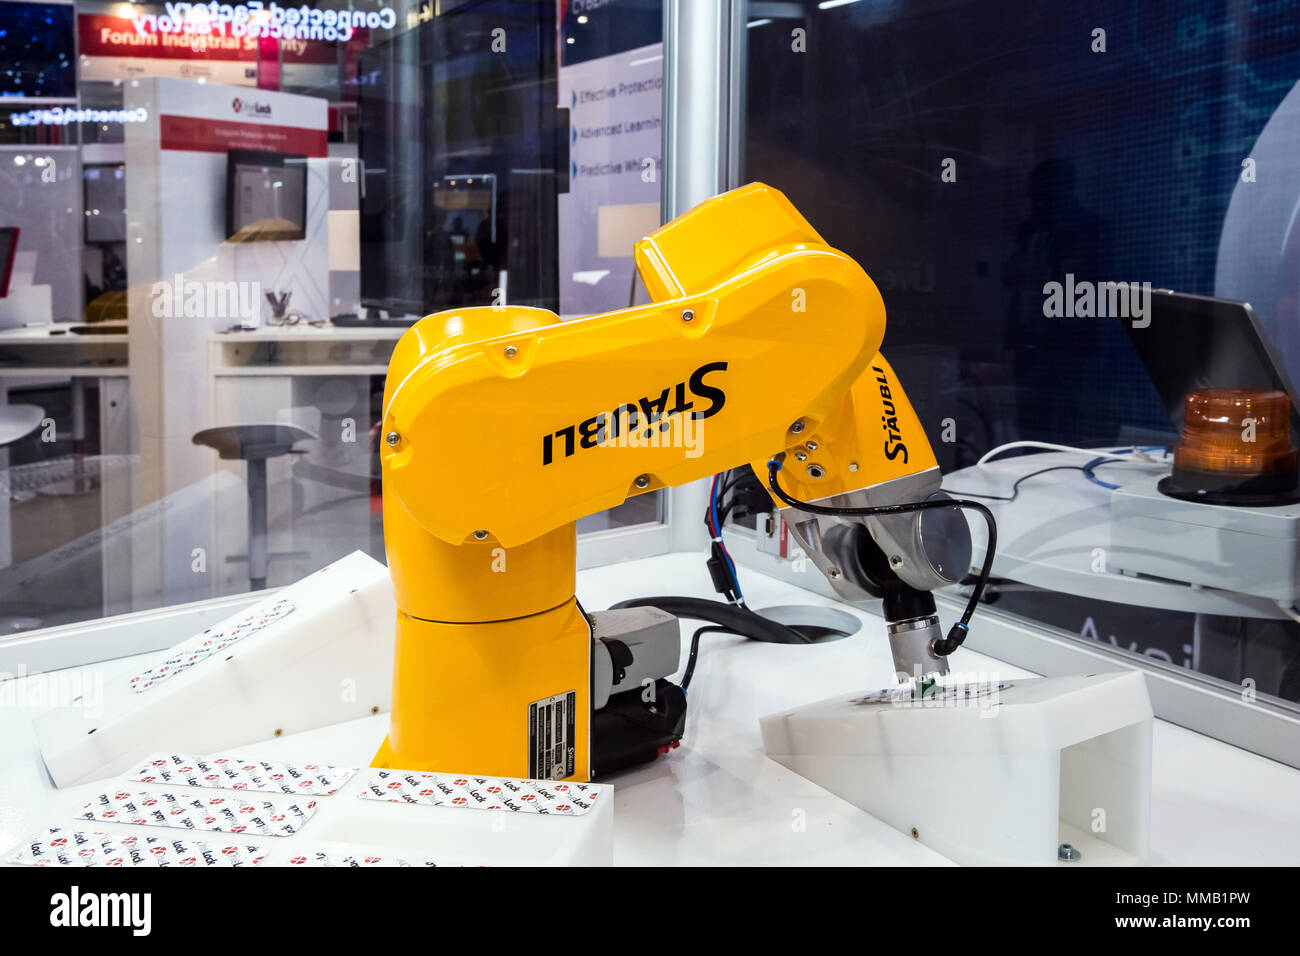 Hannover, Germany - April, 2018: Automatic Staubli Industrial Robot on Messe fair in Hannover, Germany Stock Photo